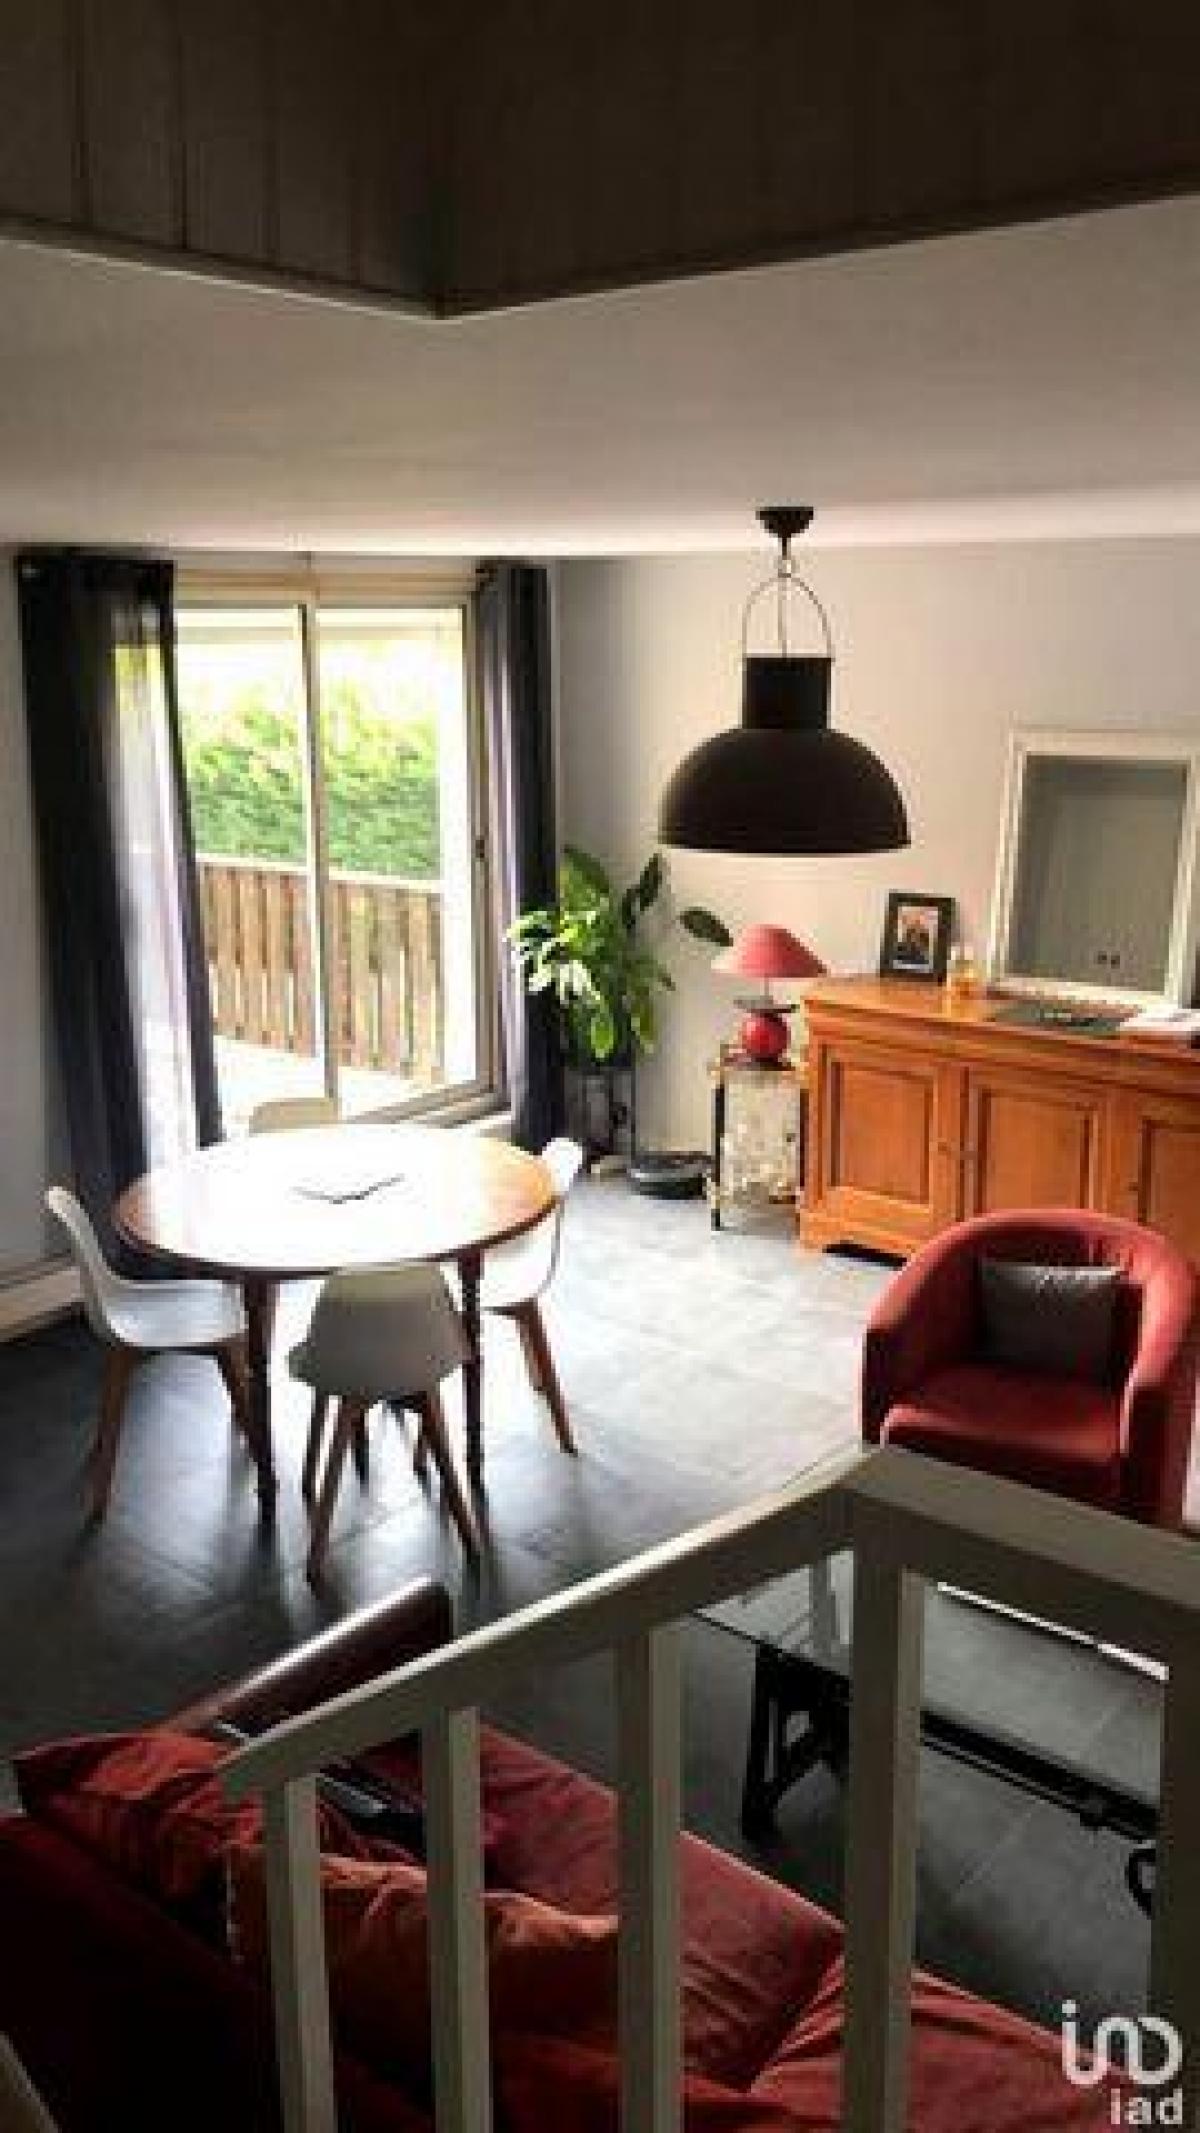 Picture of Condo For Sale in Courcouronnes, Bretagne, France